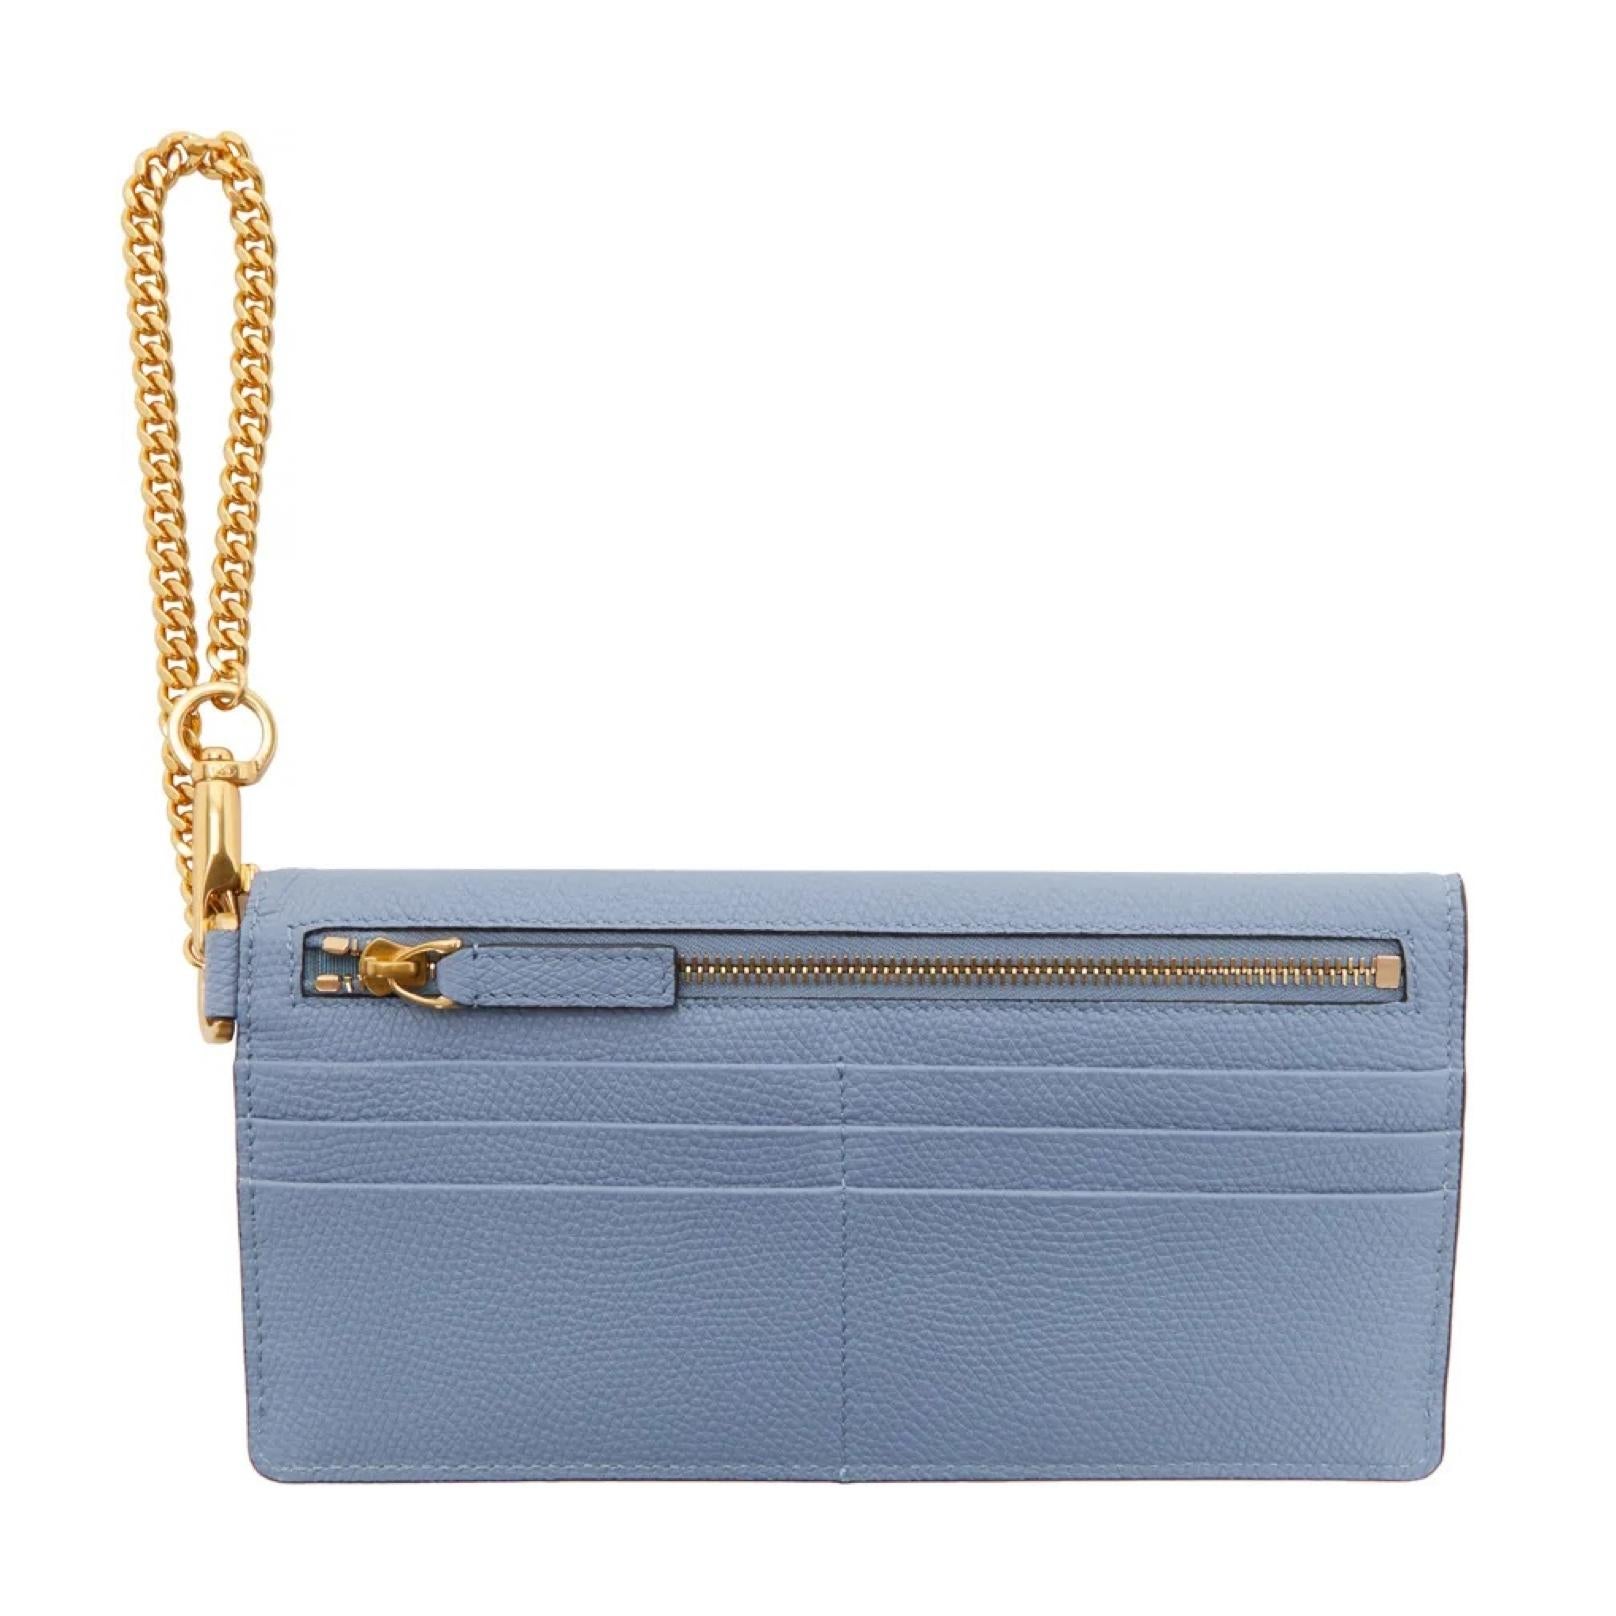 This pouch clutch is made with grained calfskin in baby blue. The bag features gold-tone hardware, a curb chain strap with lanyard clasp fastening at side, Logo hardware at face, exterior zip pocket and card slots at back, press-stud closure at main